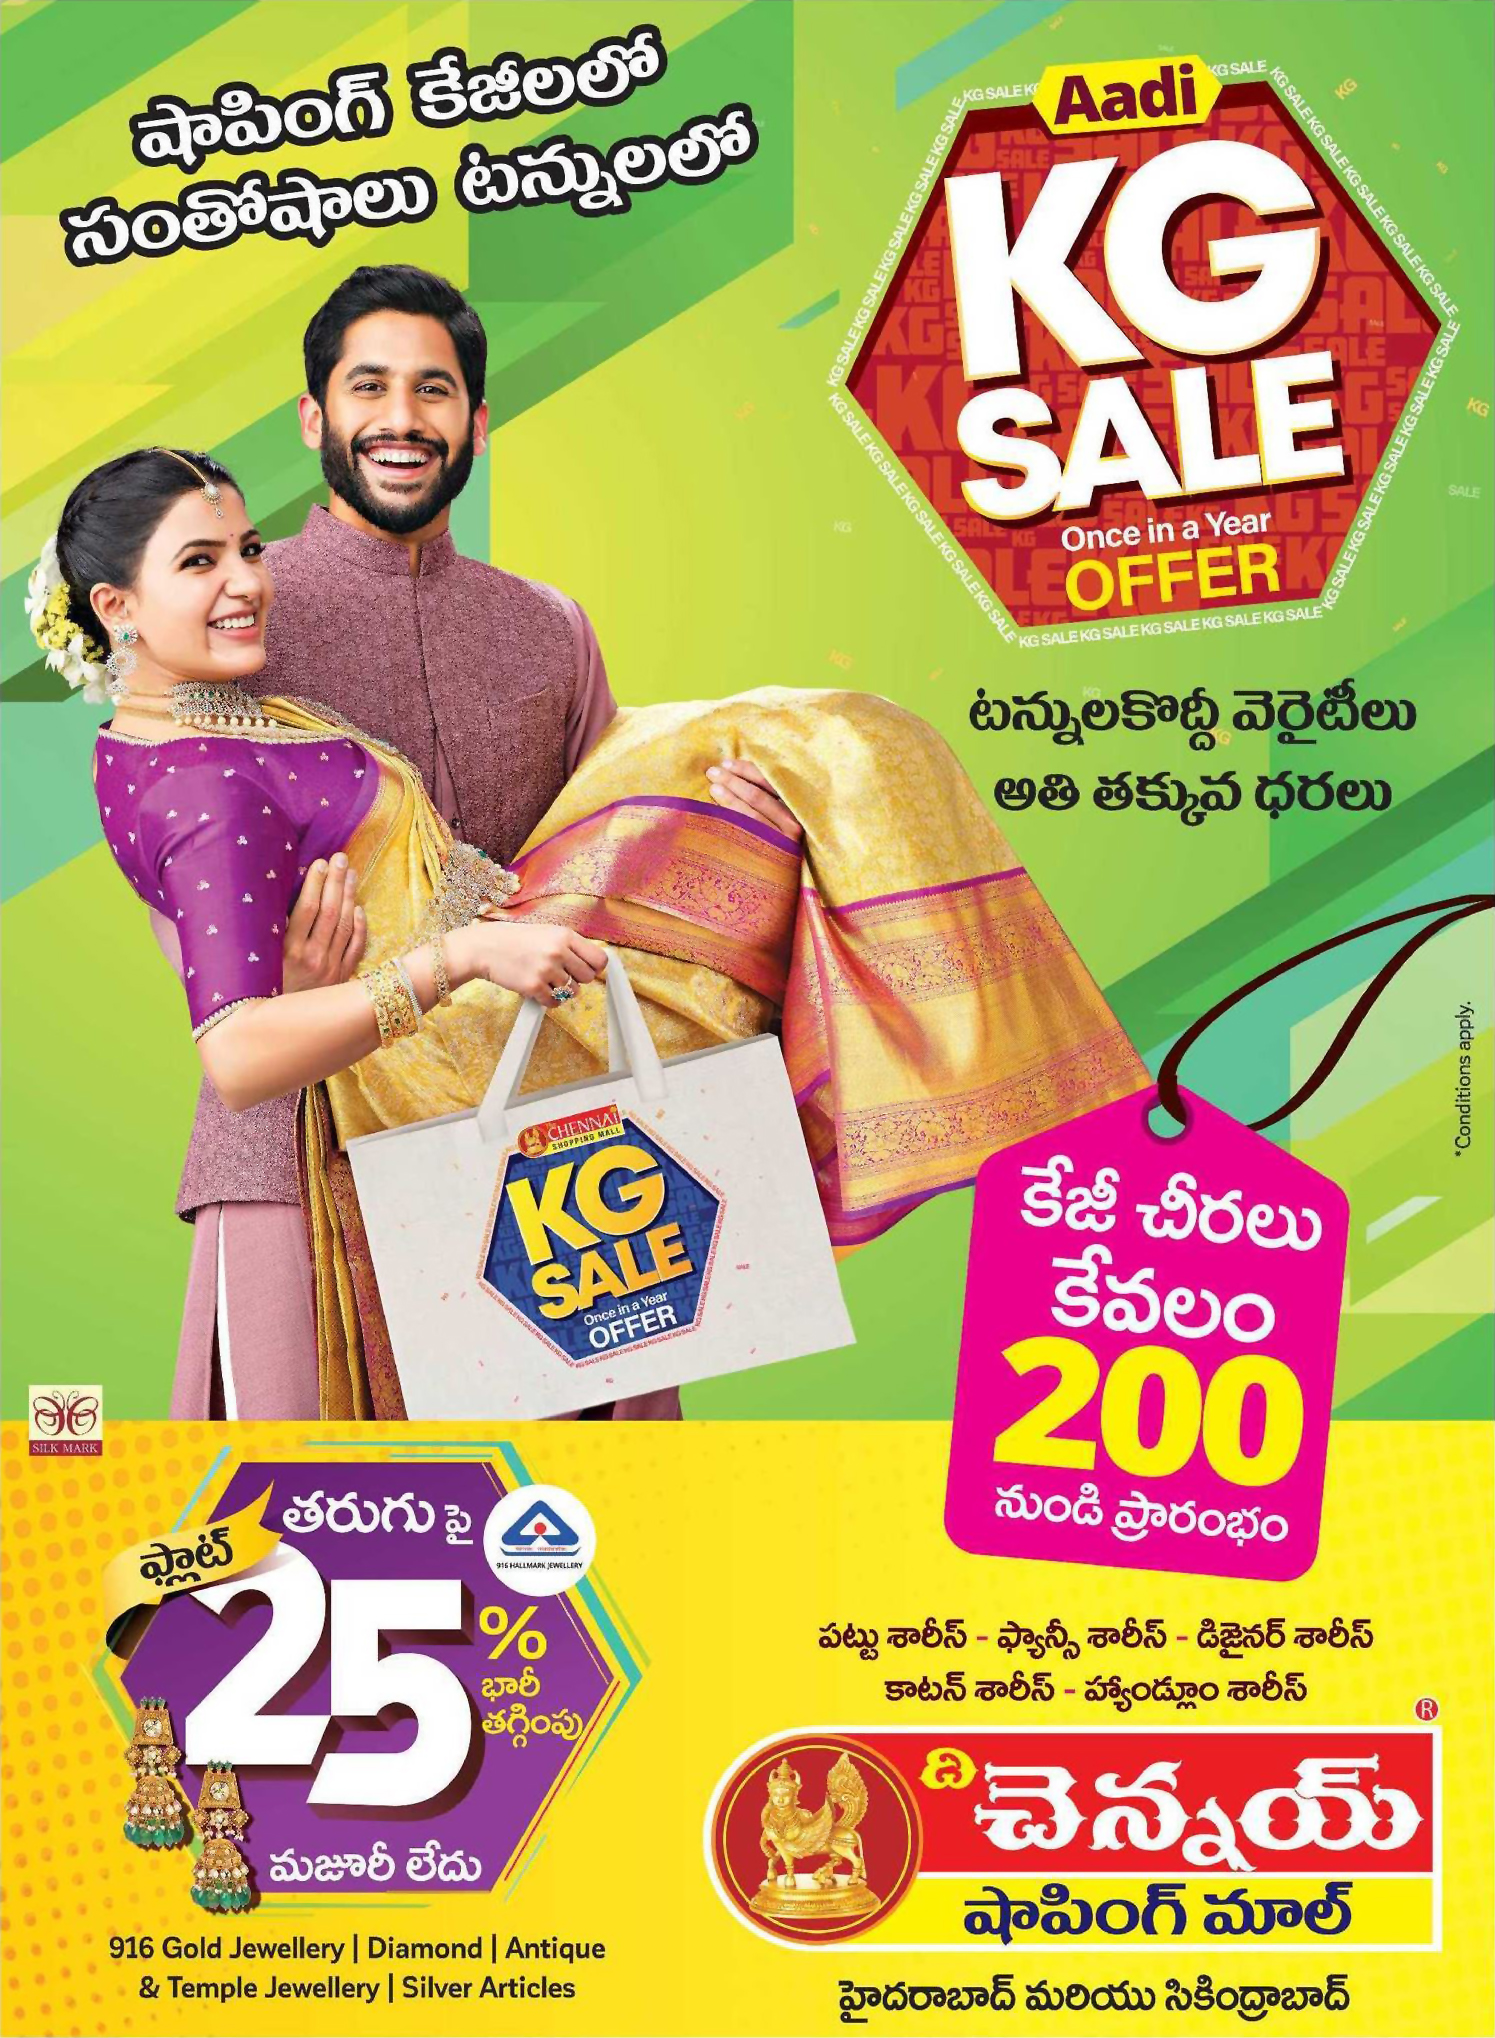 the-chennai-shopping-mall-aadi-k-g-sale-once-in-a-year-offer-ad-eenadu-hyderabad-3-7-2021